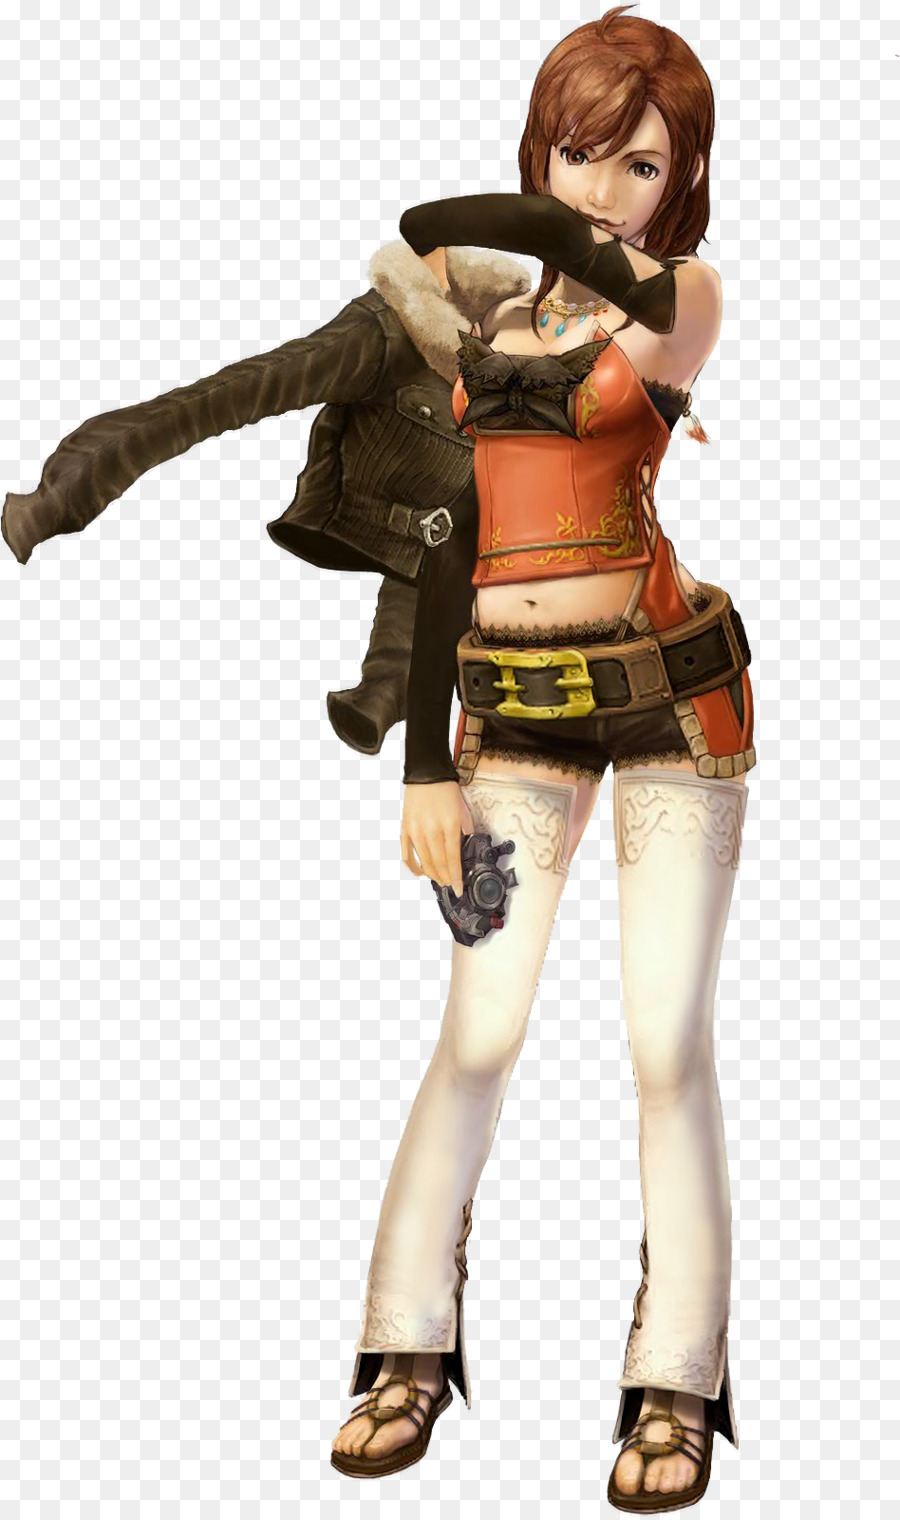 Final Fantasy Crystal Chronicles: The Crystal Bearers Final Fantasy Crystal Chronicles: Echoes of Time Final Fantasy XIII - Belle &. Boo png download - 948*1600 - Free Transparent Final Fantasy Crystal Chronicles png Download.